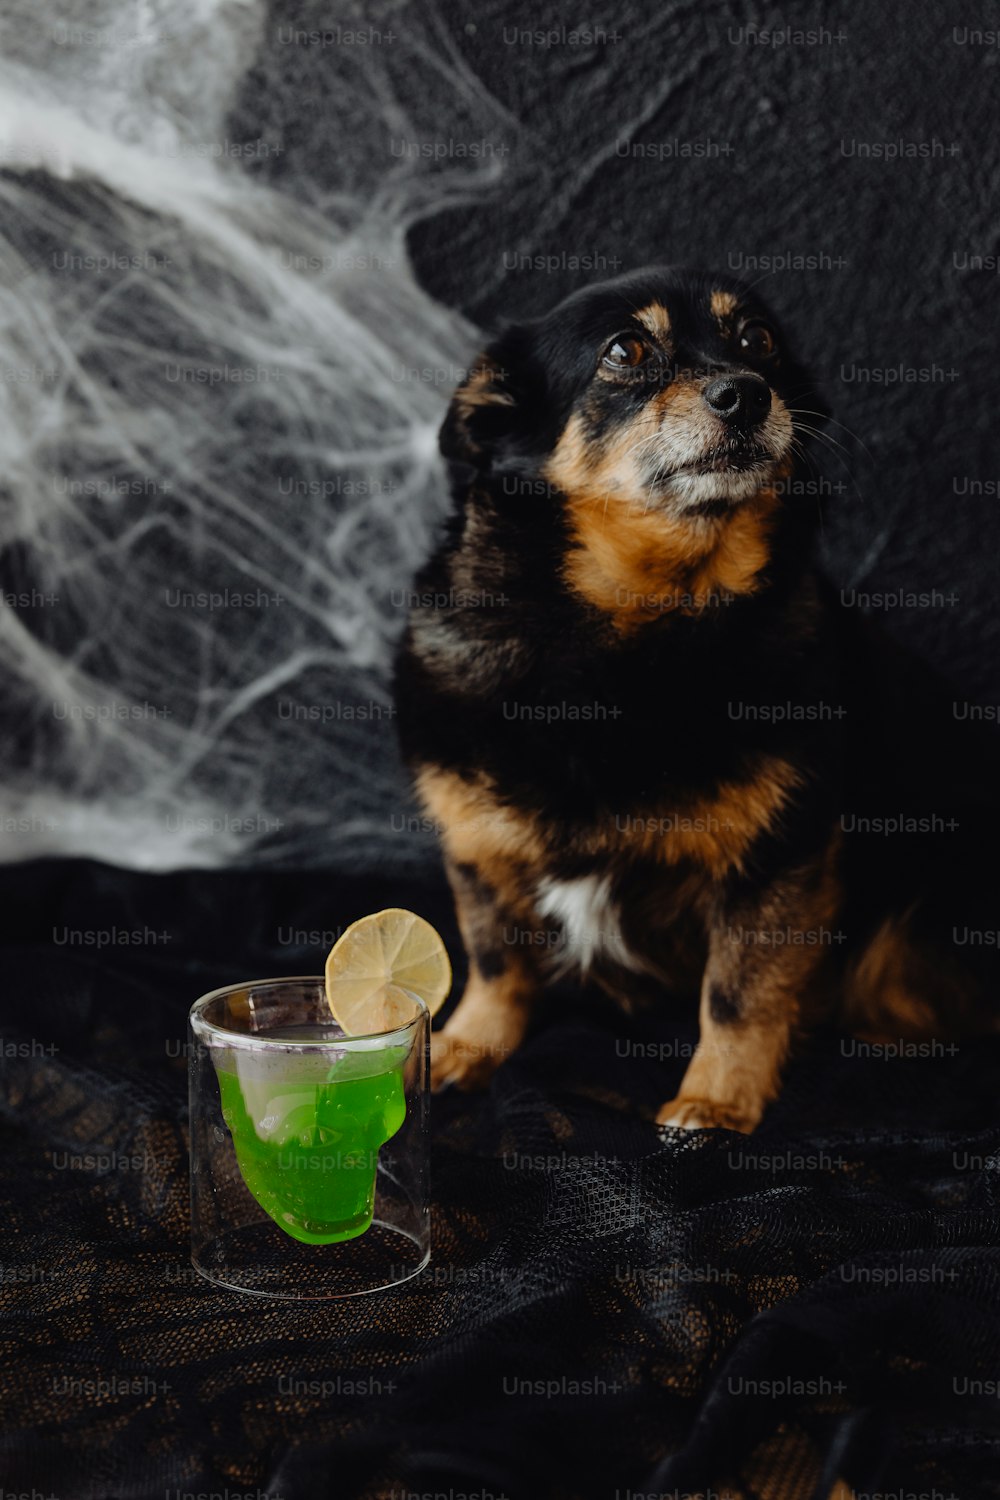 a dog sitting next to a glass of green liquid